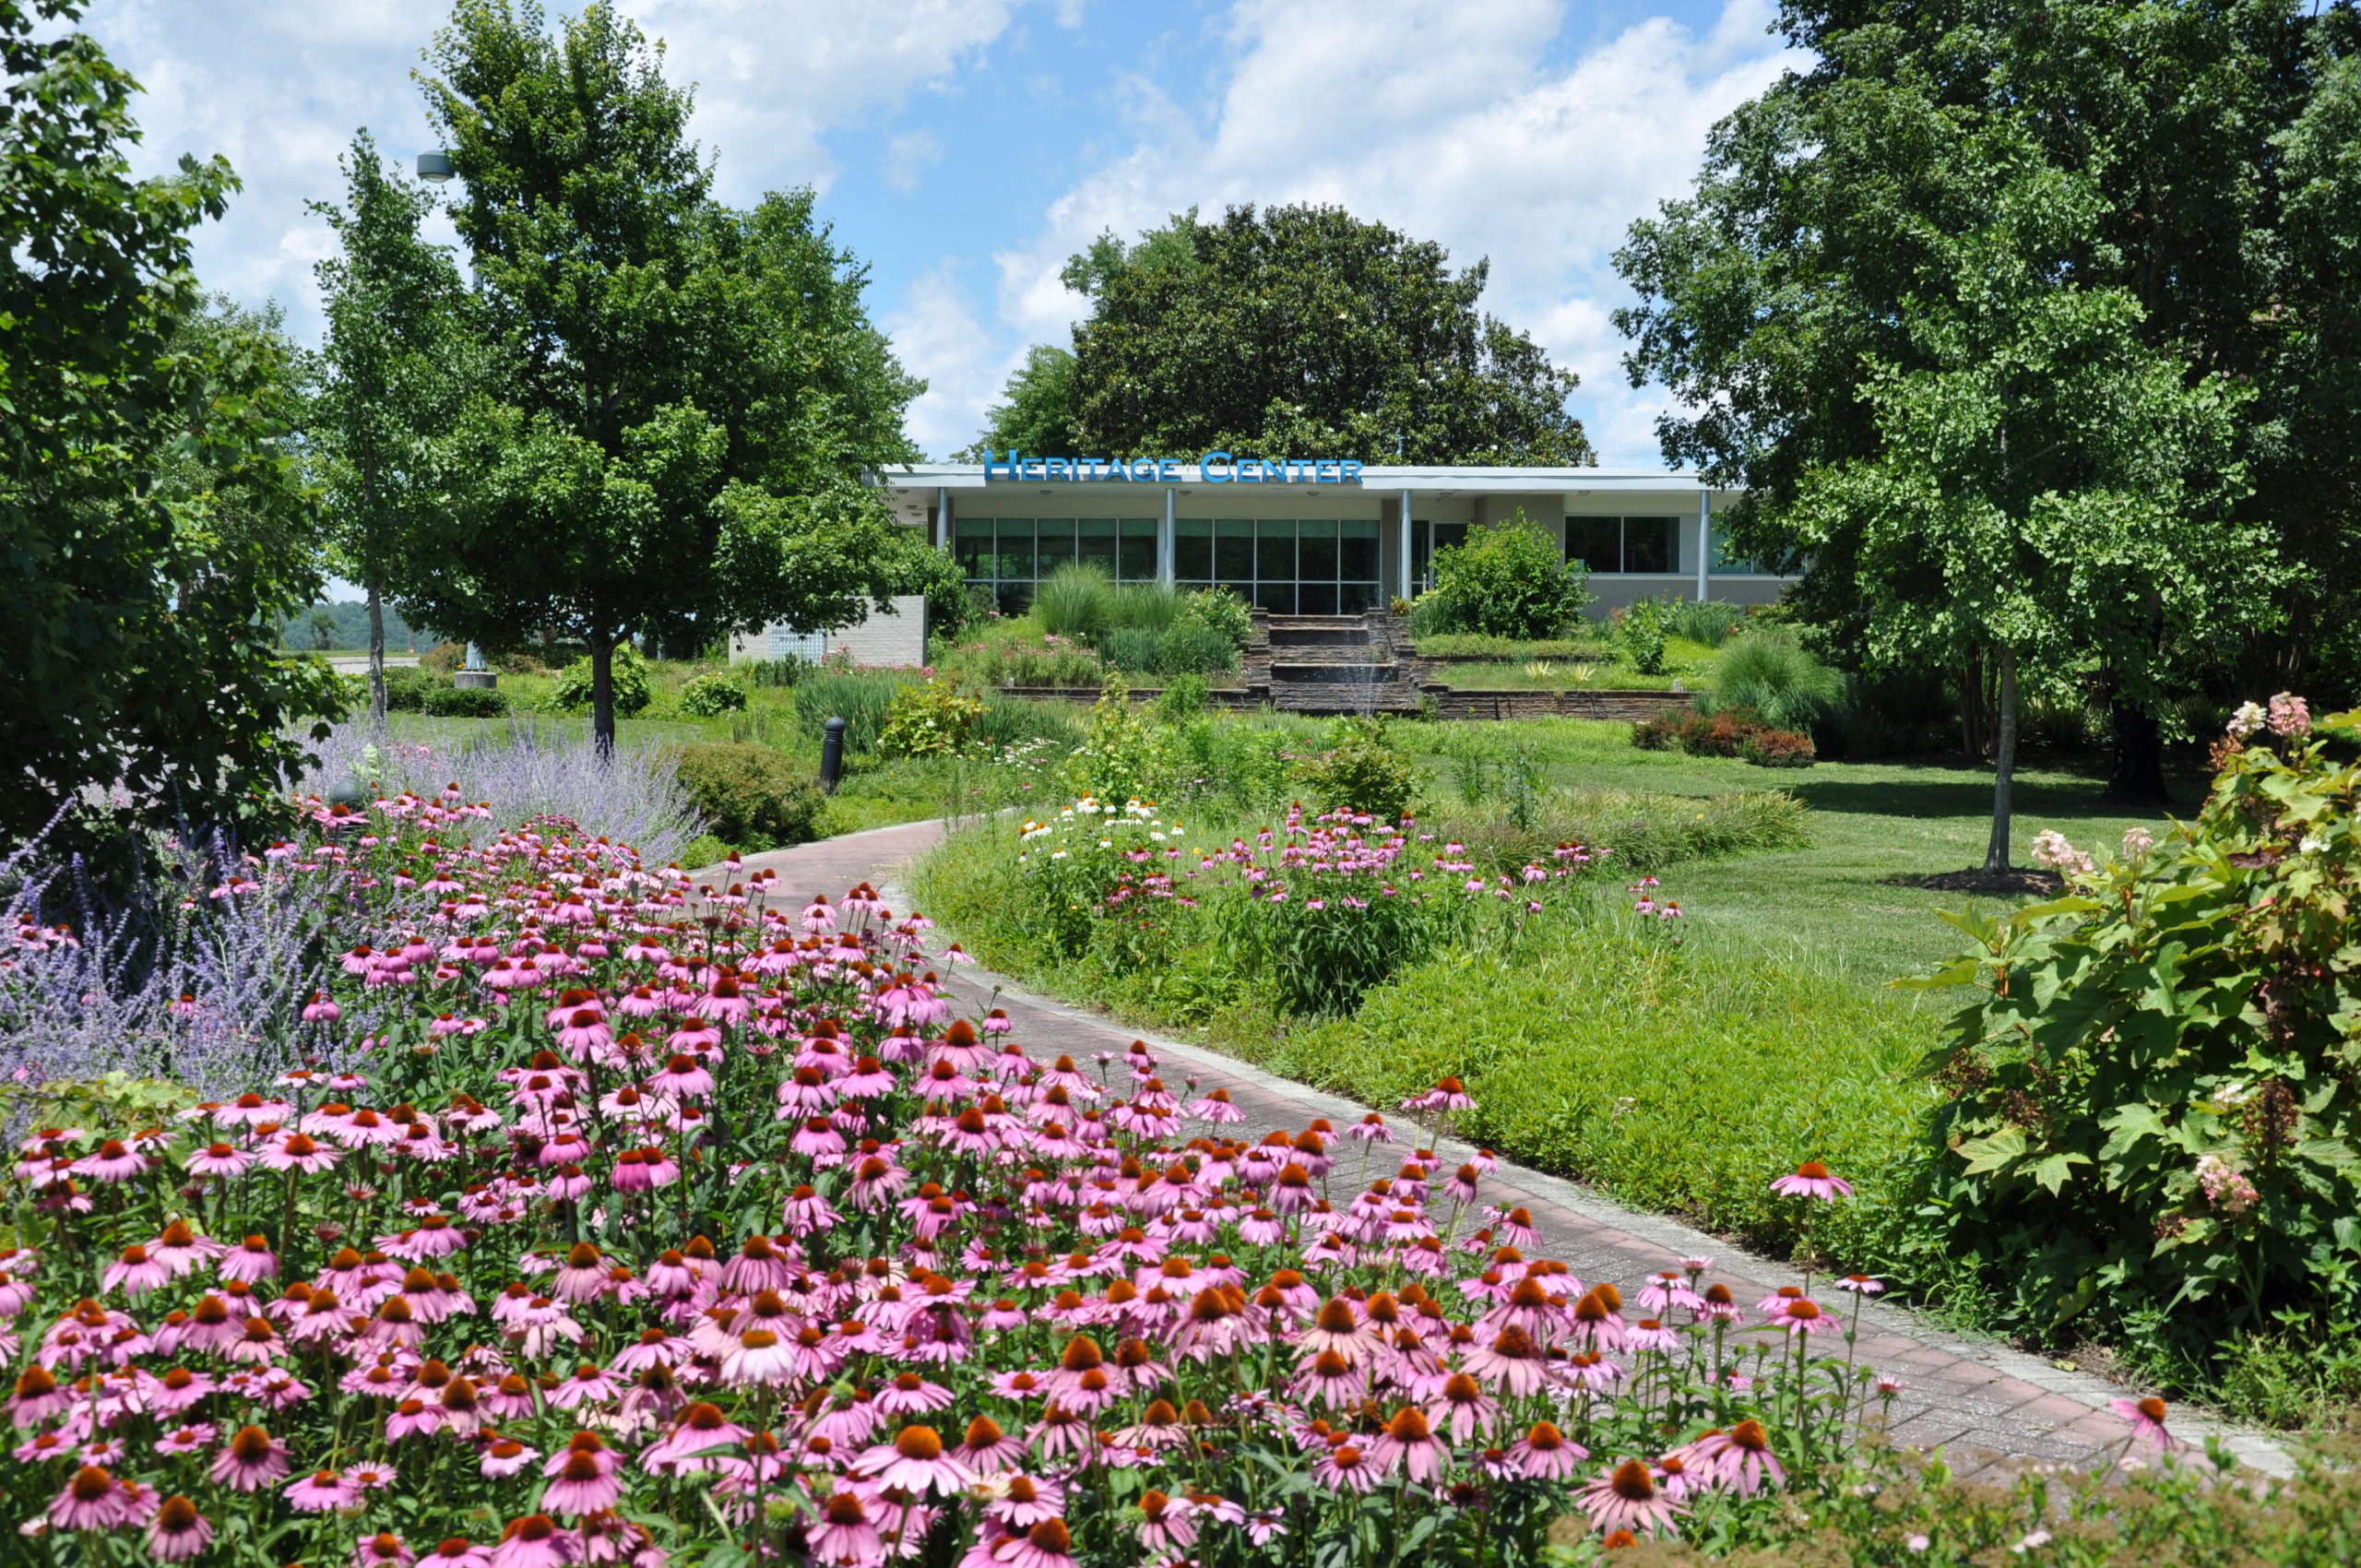 Photo: Horizon Center with flowers in bloom